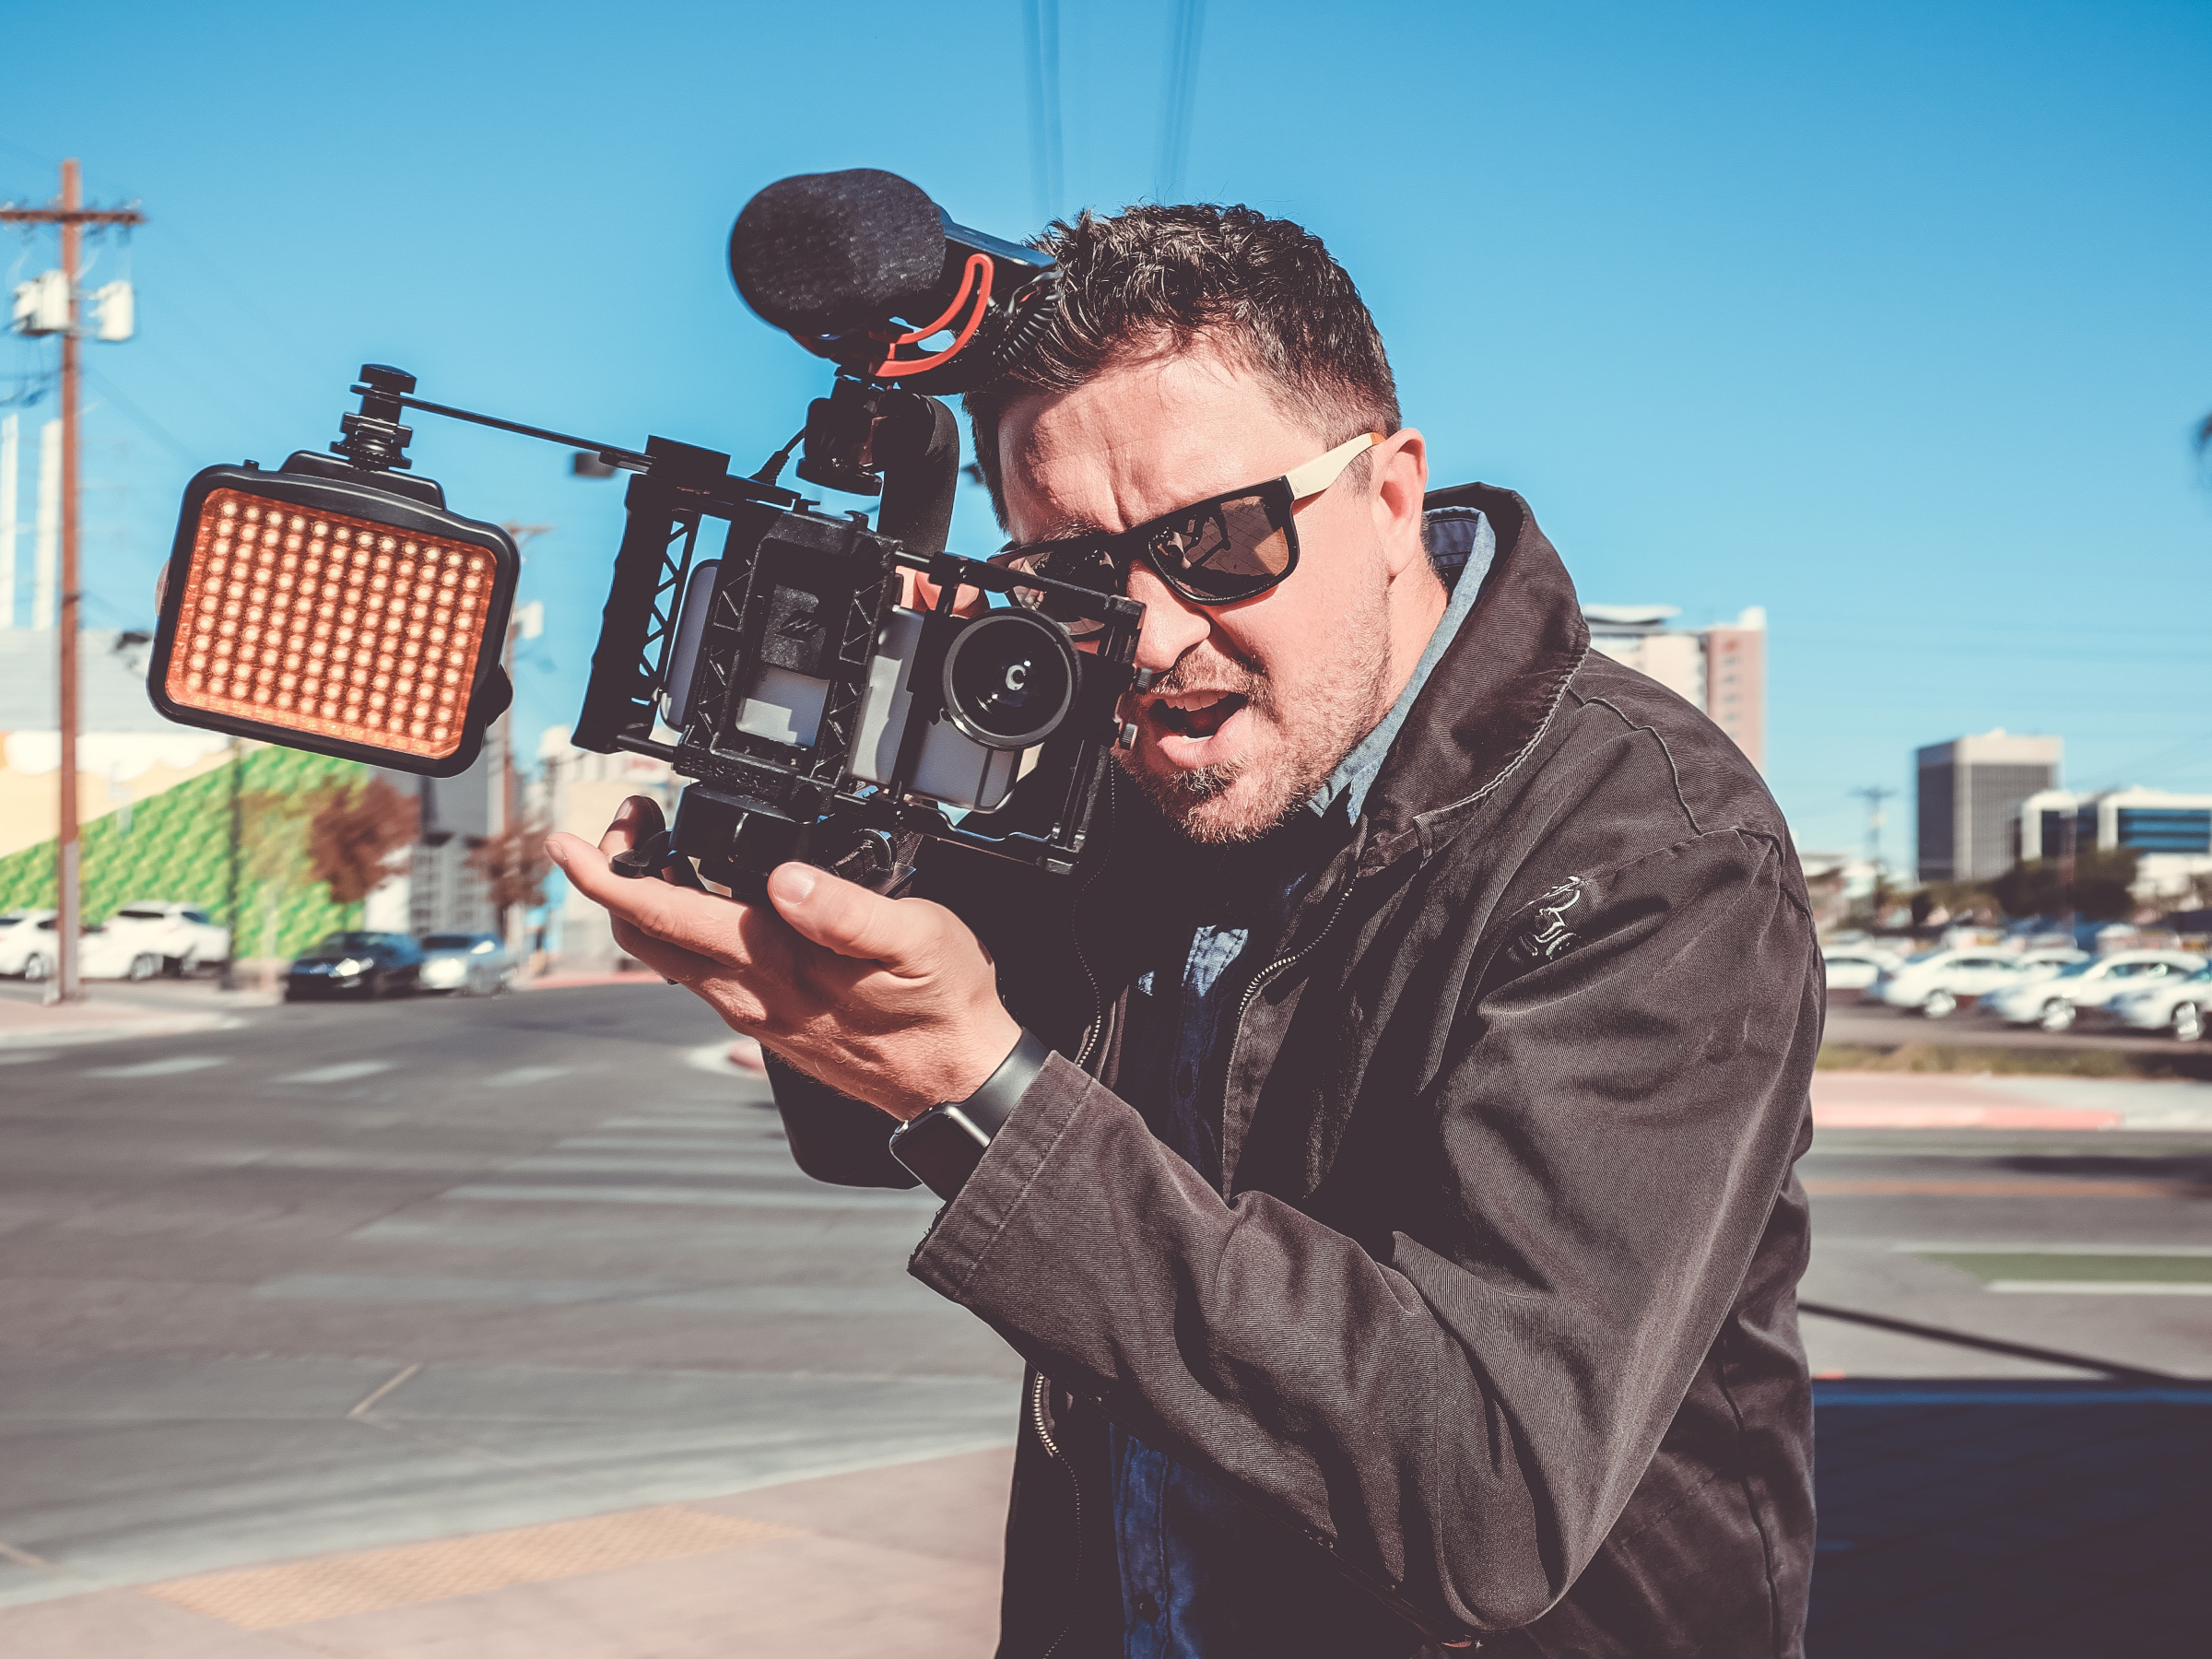 A man with a camera shooting video on the street.